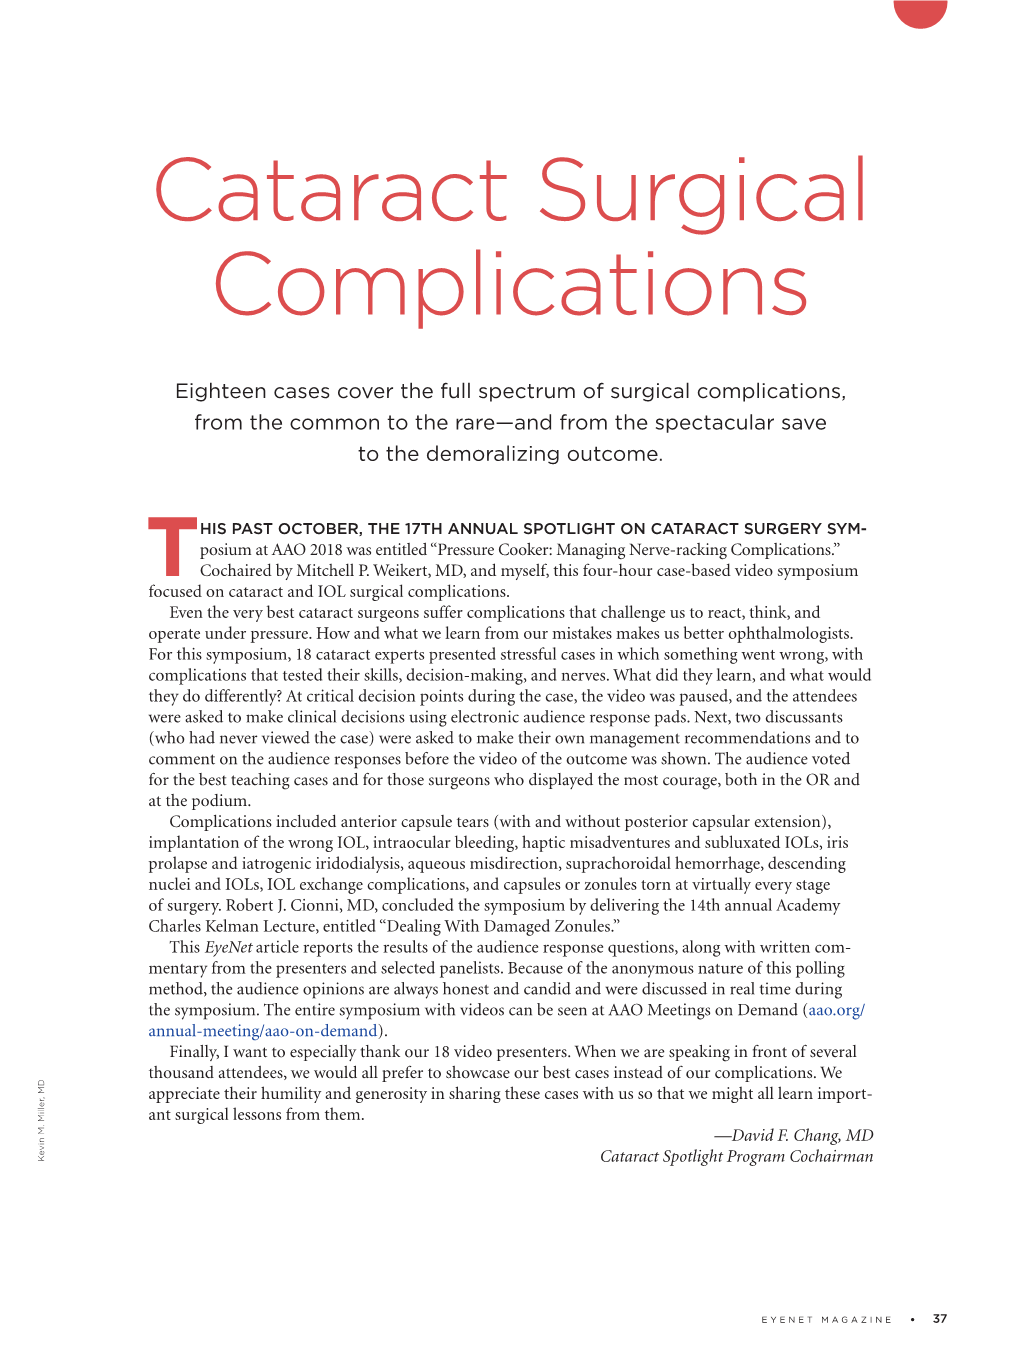 Cataract Surgical Complications